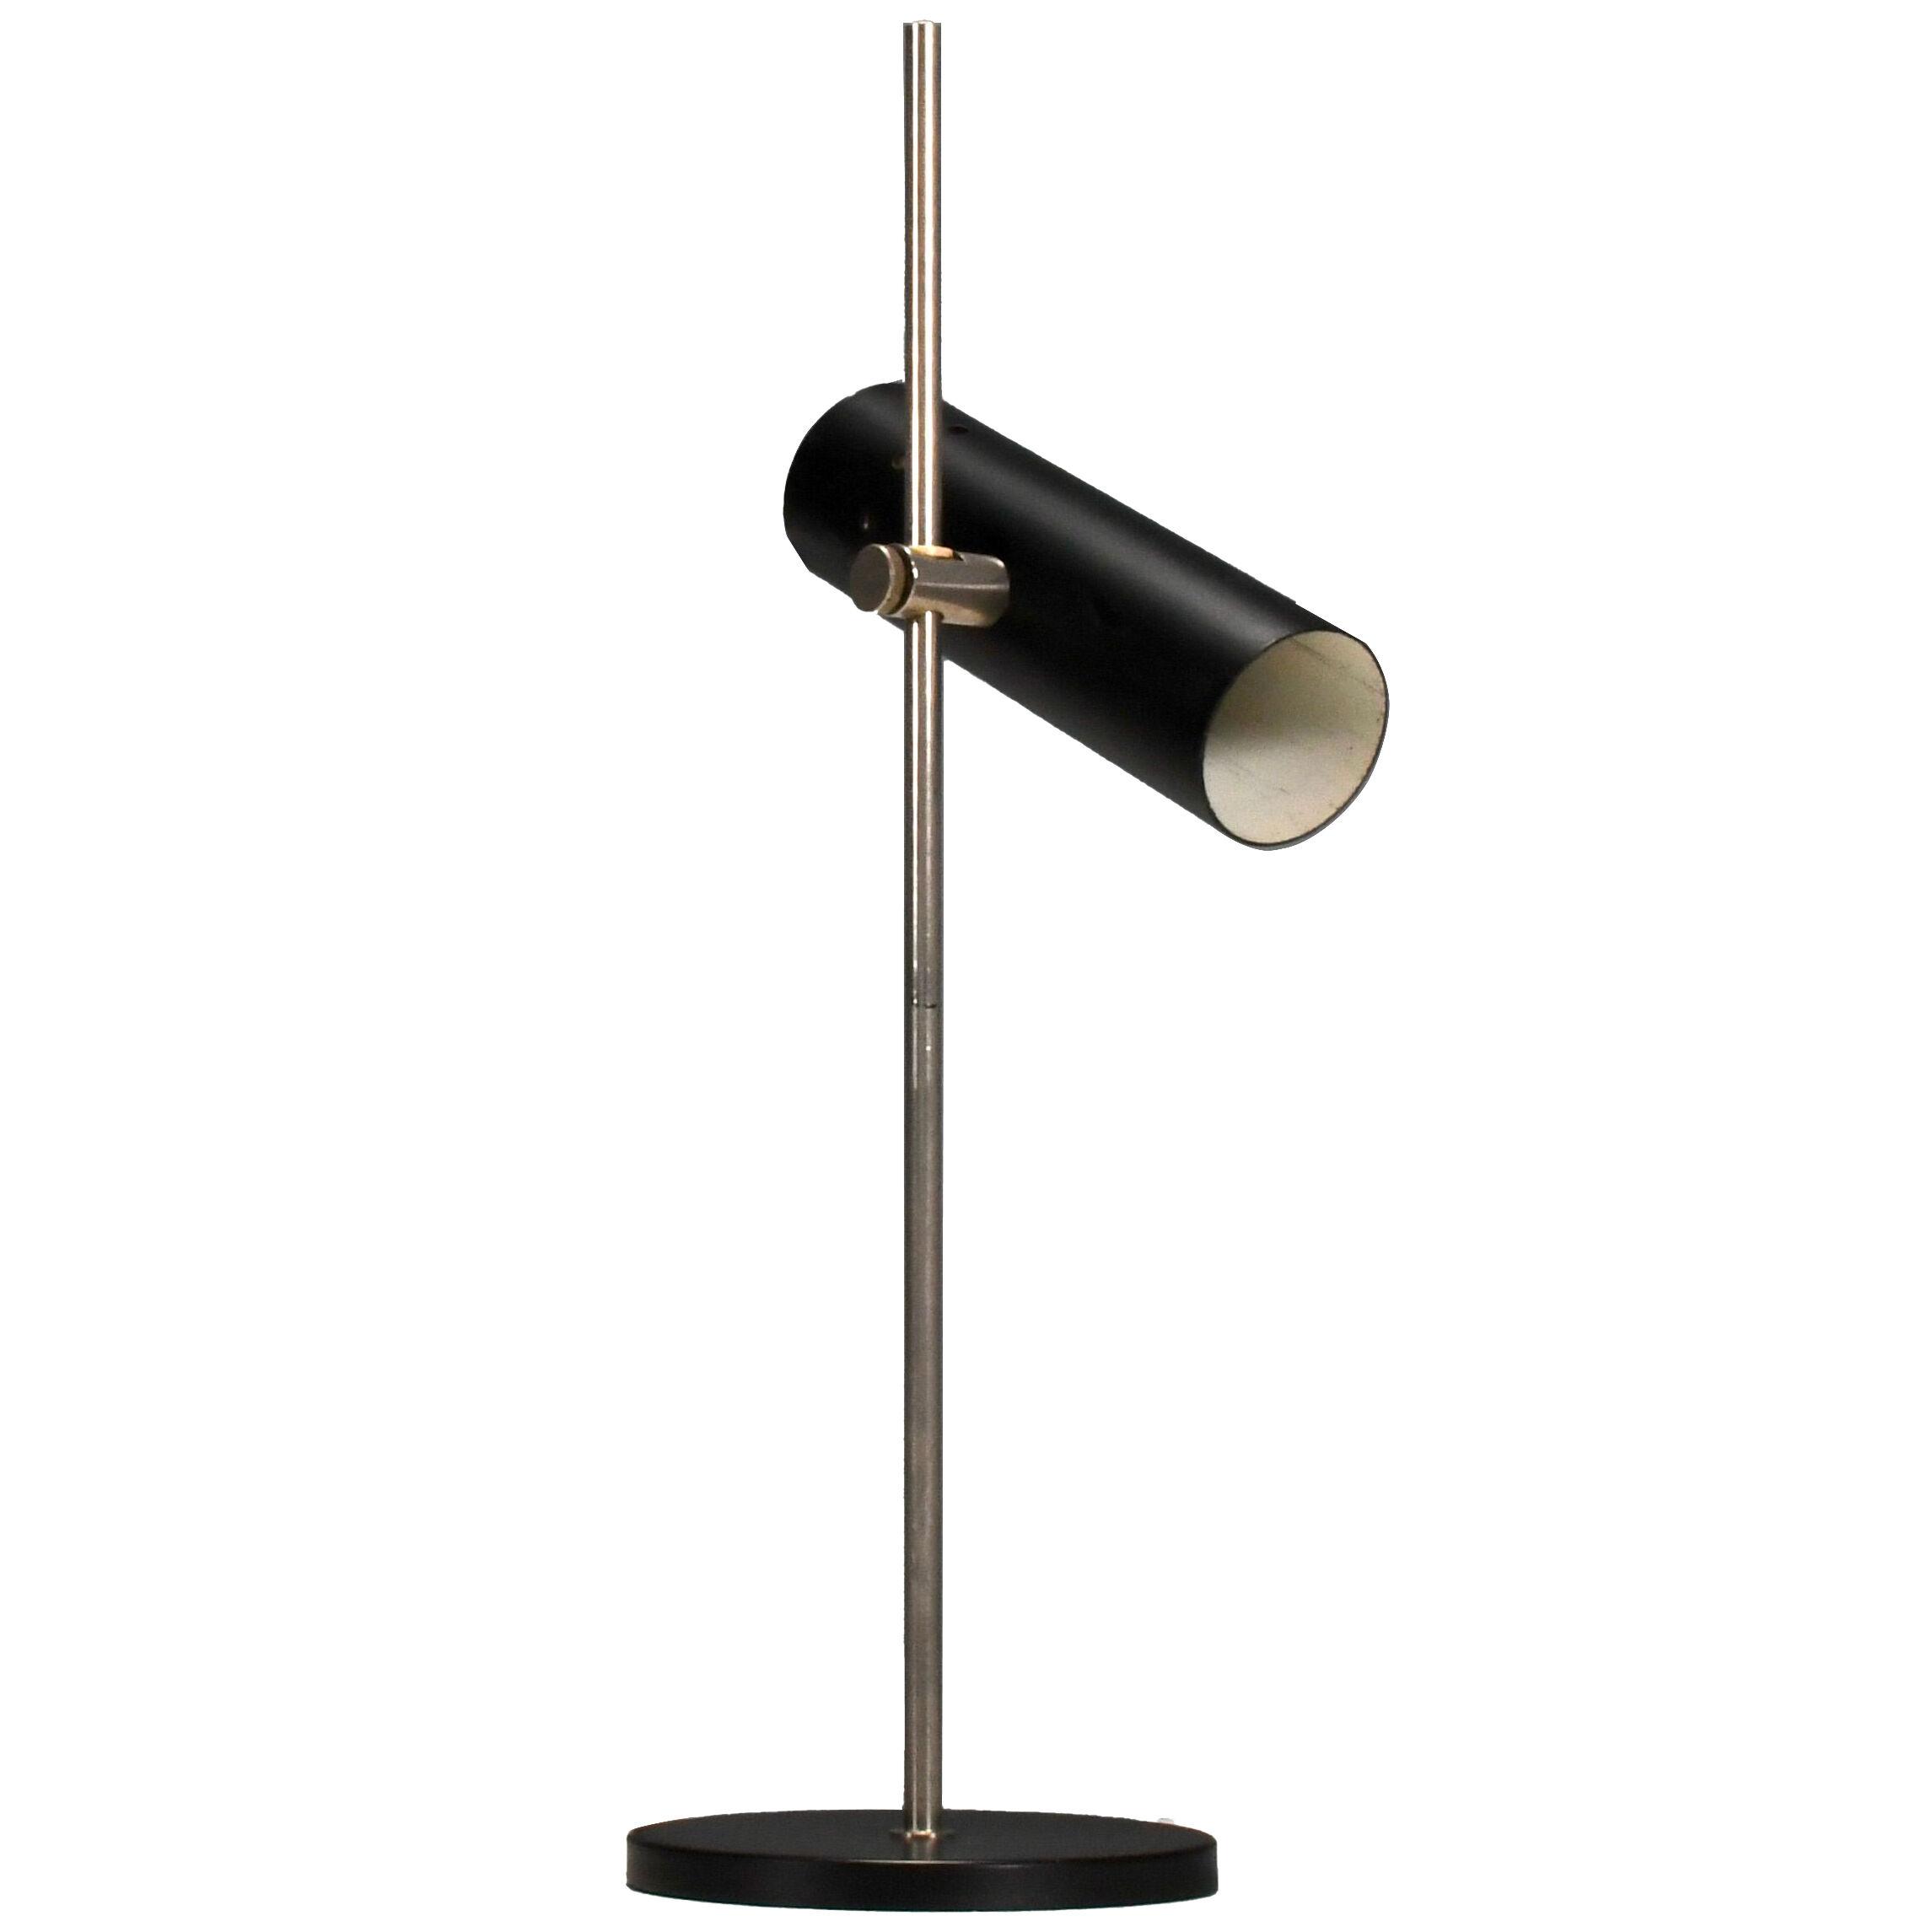 Compact Table Lamp by Alain richard for Disderot, France 1950s